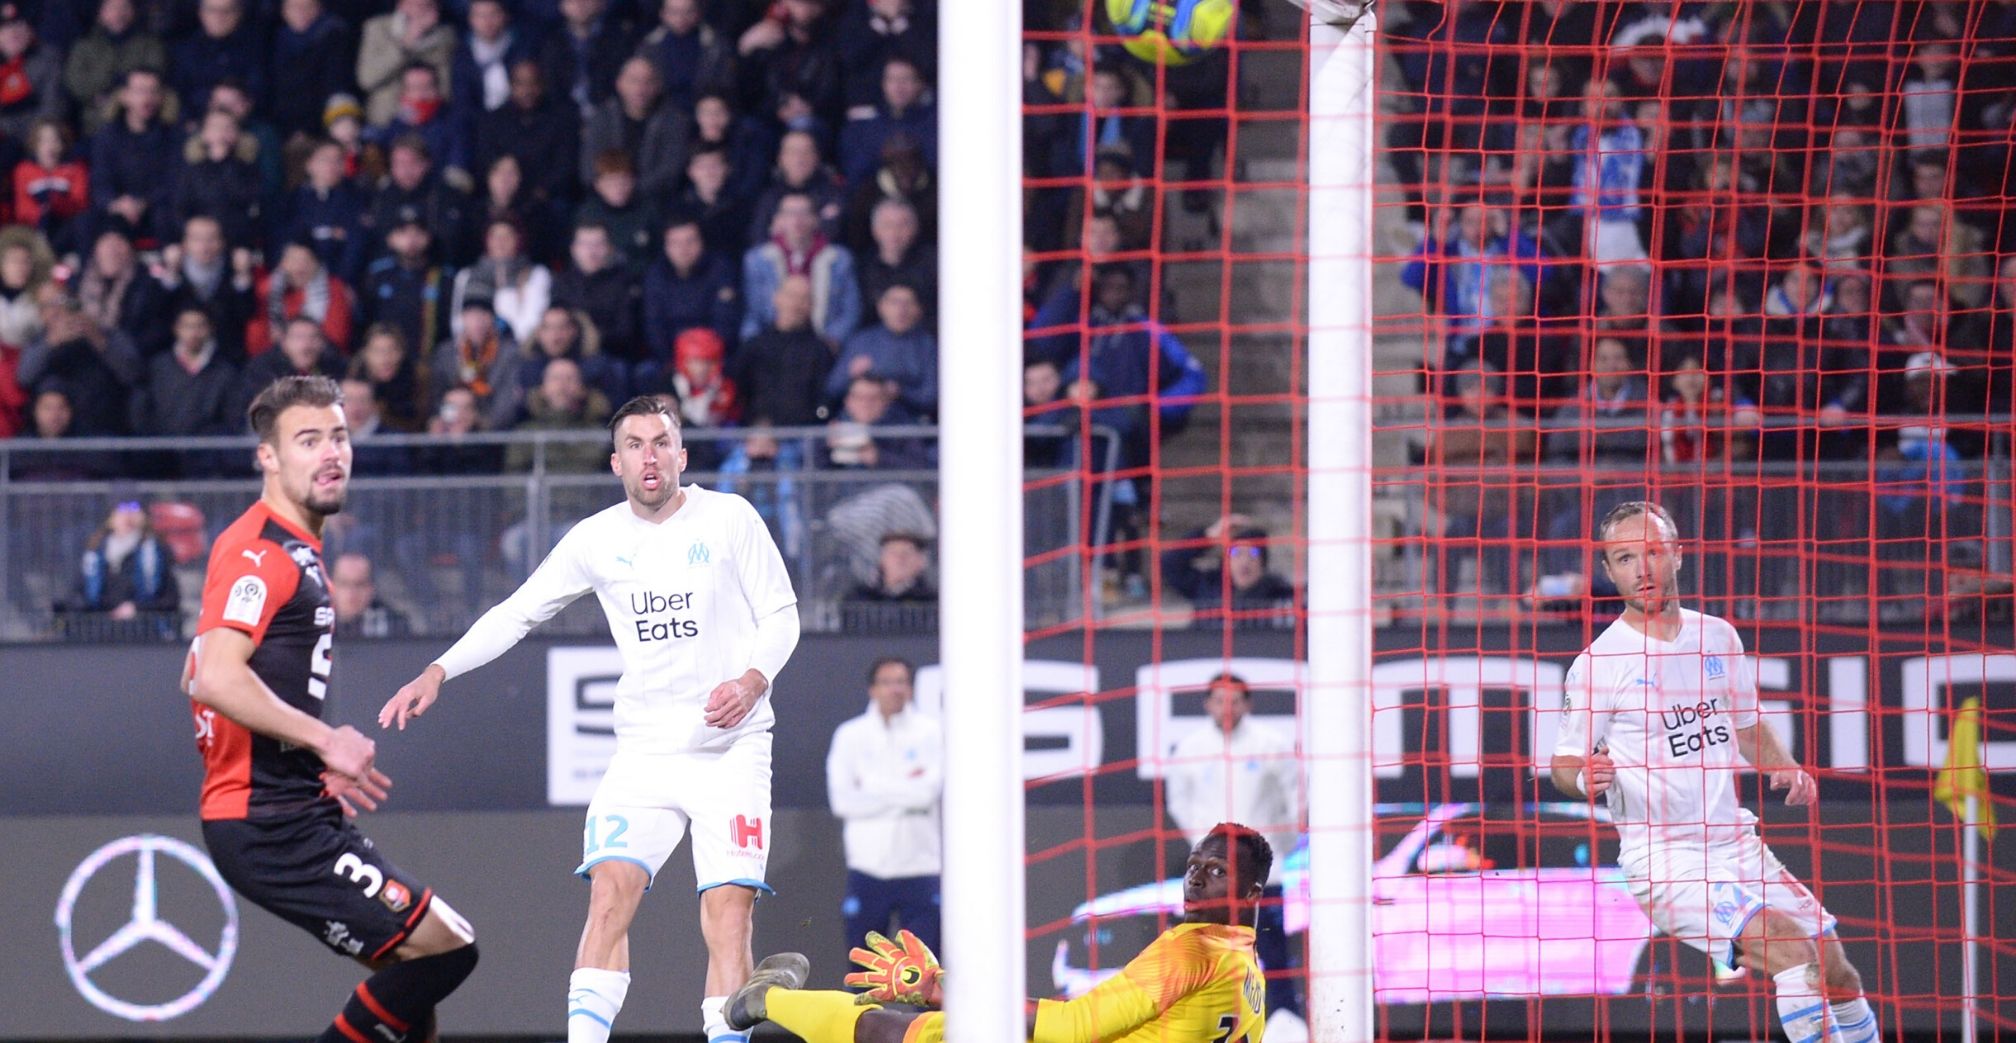 OM's Kevin Strootman scored a superb late winner off the bench in Rennes